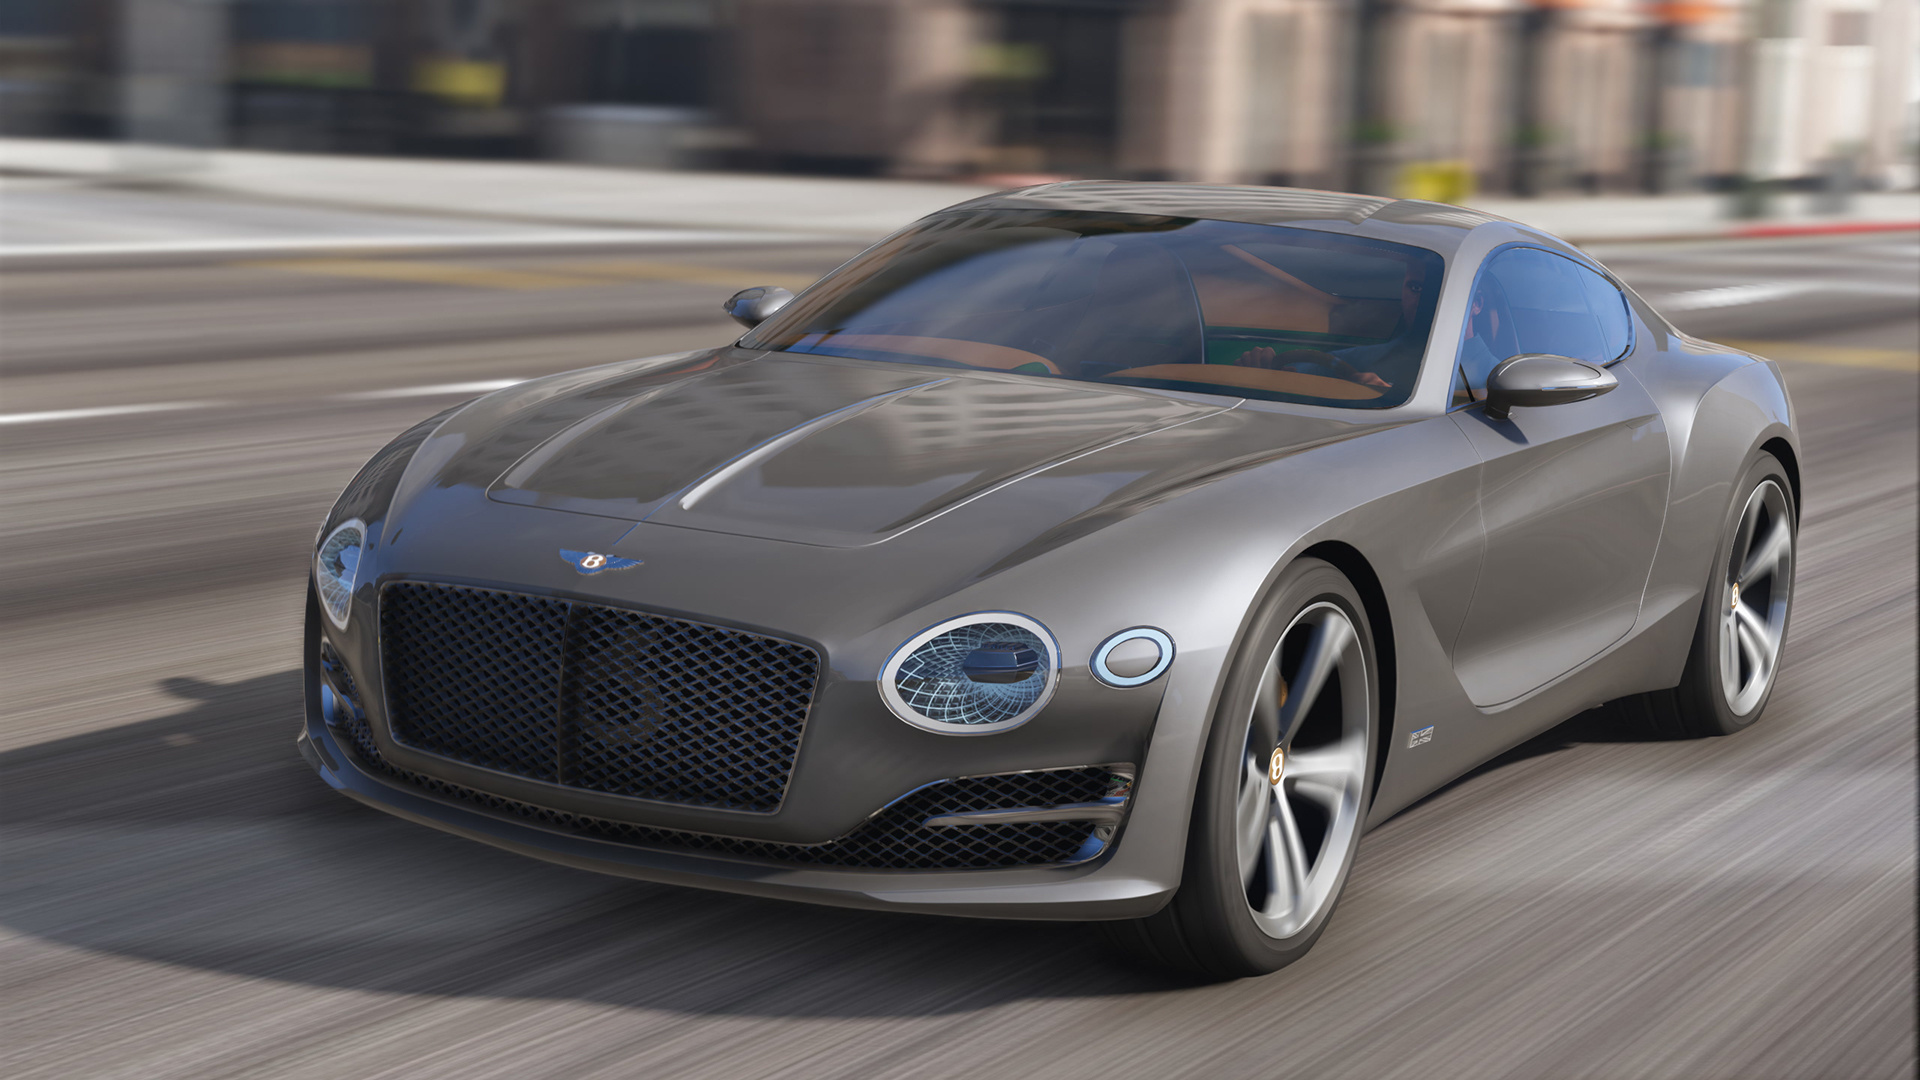 Bentley Exp 10 Speed 6 Concept Lhd Add On Tuning Template Lods Gta5 Mods Com